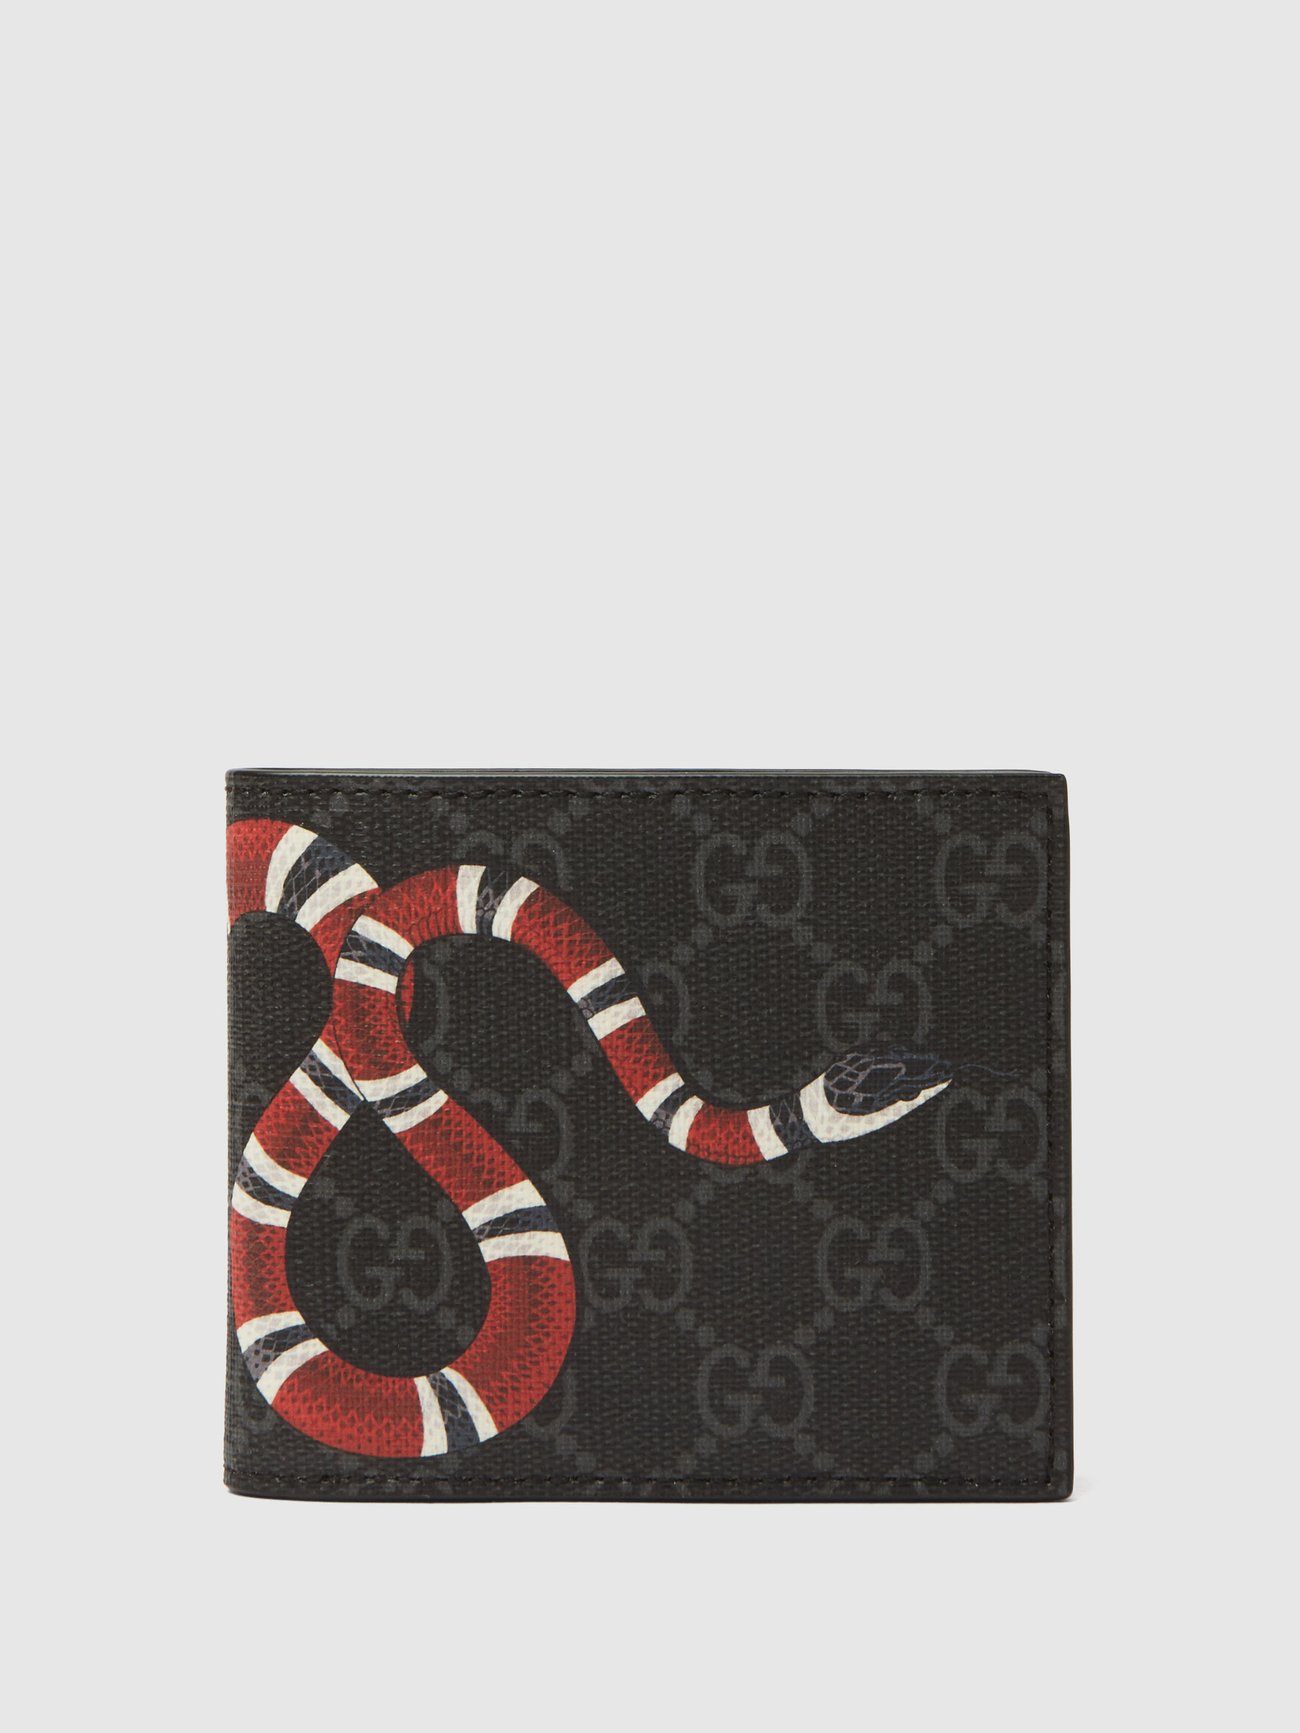 Gucci Snake Wallet Black Gently Used Condition Free - Depop